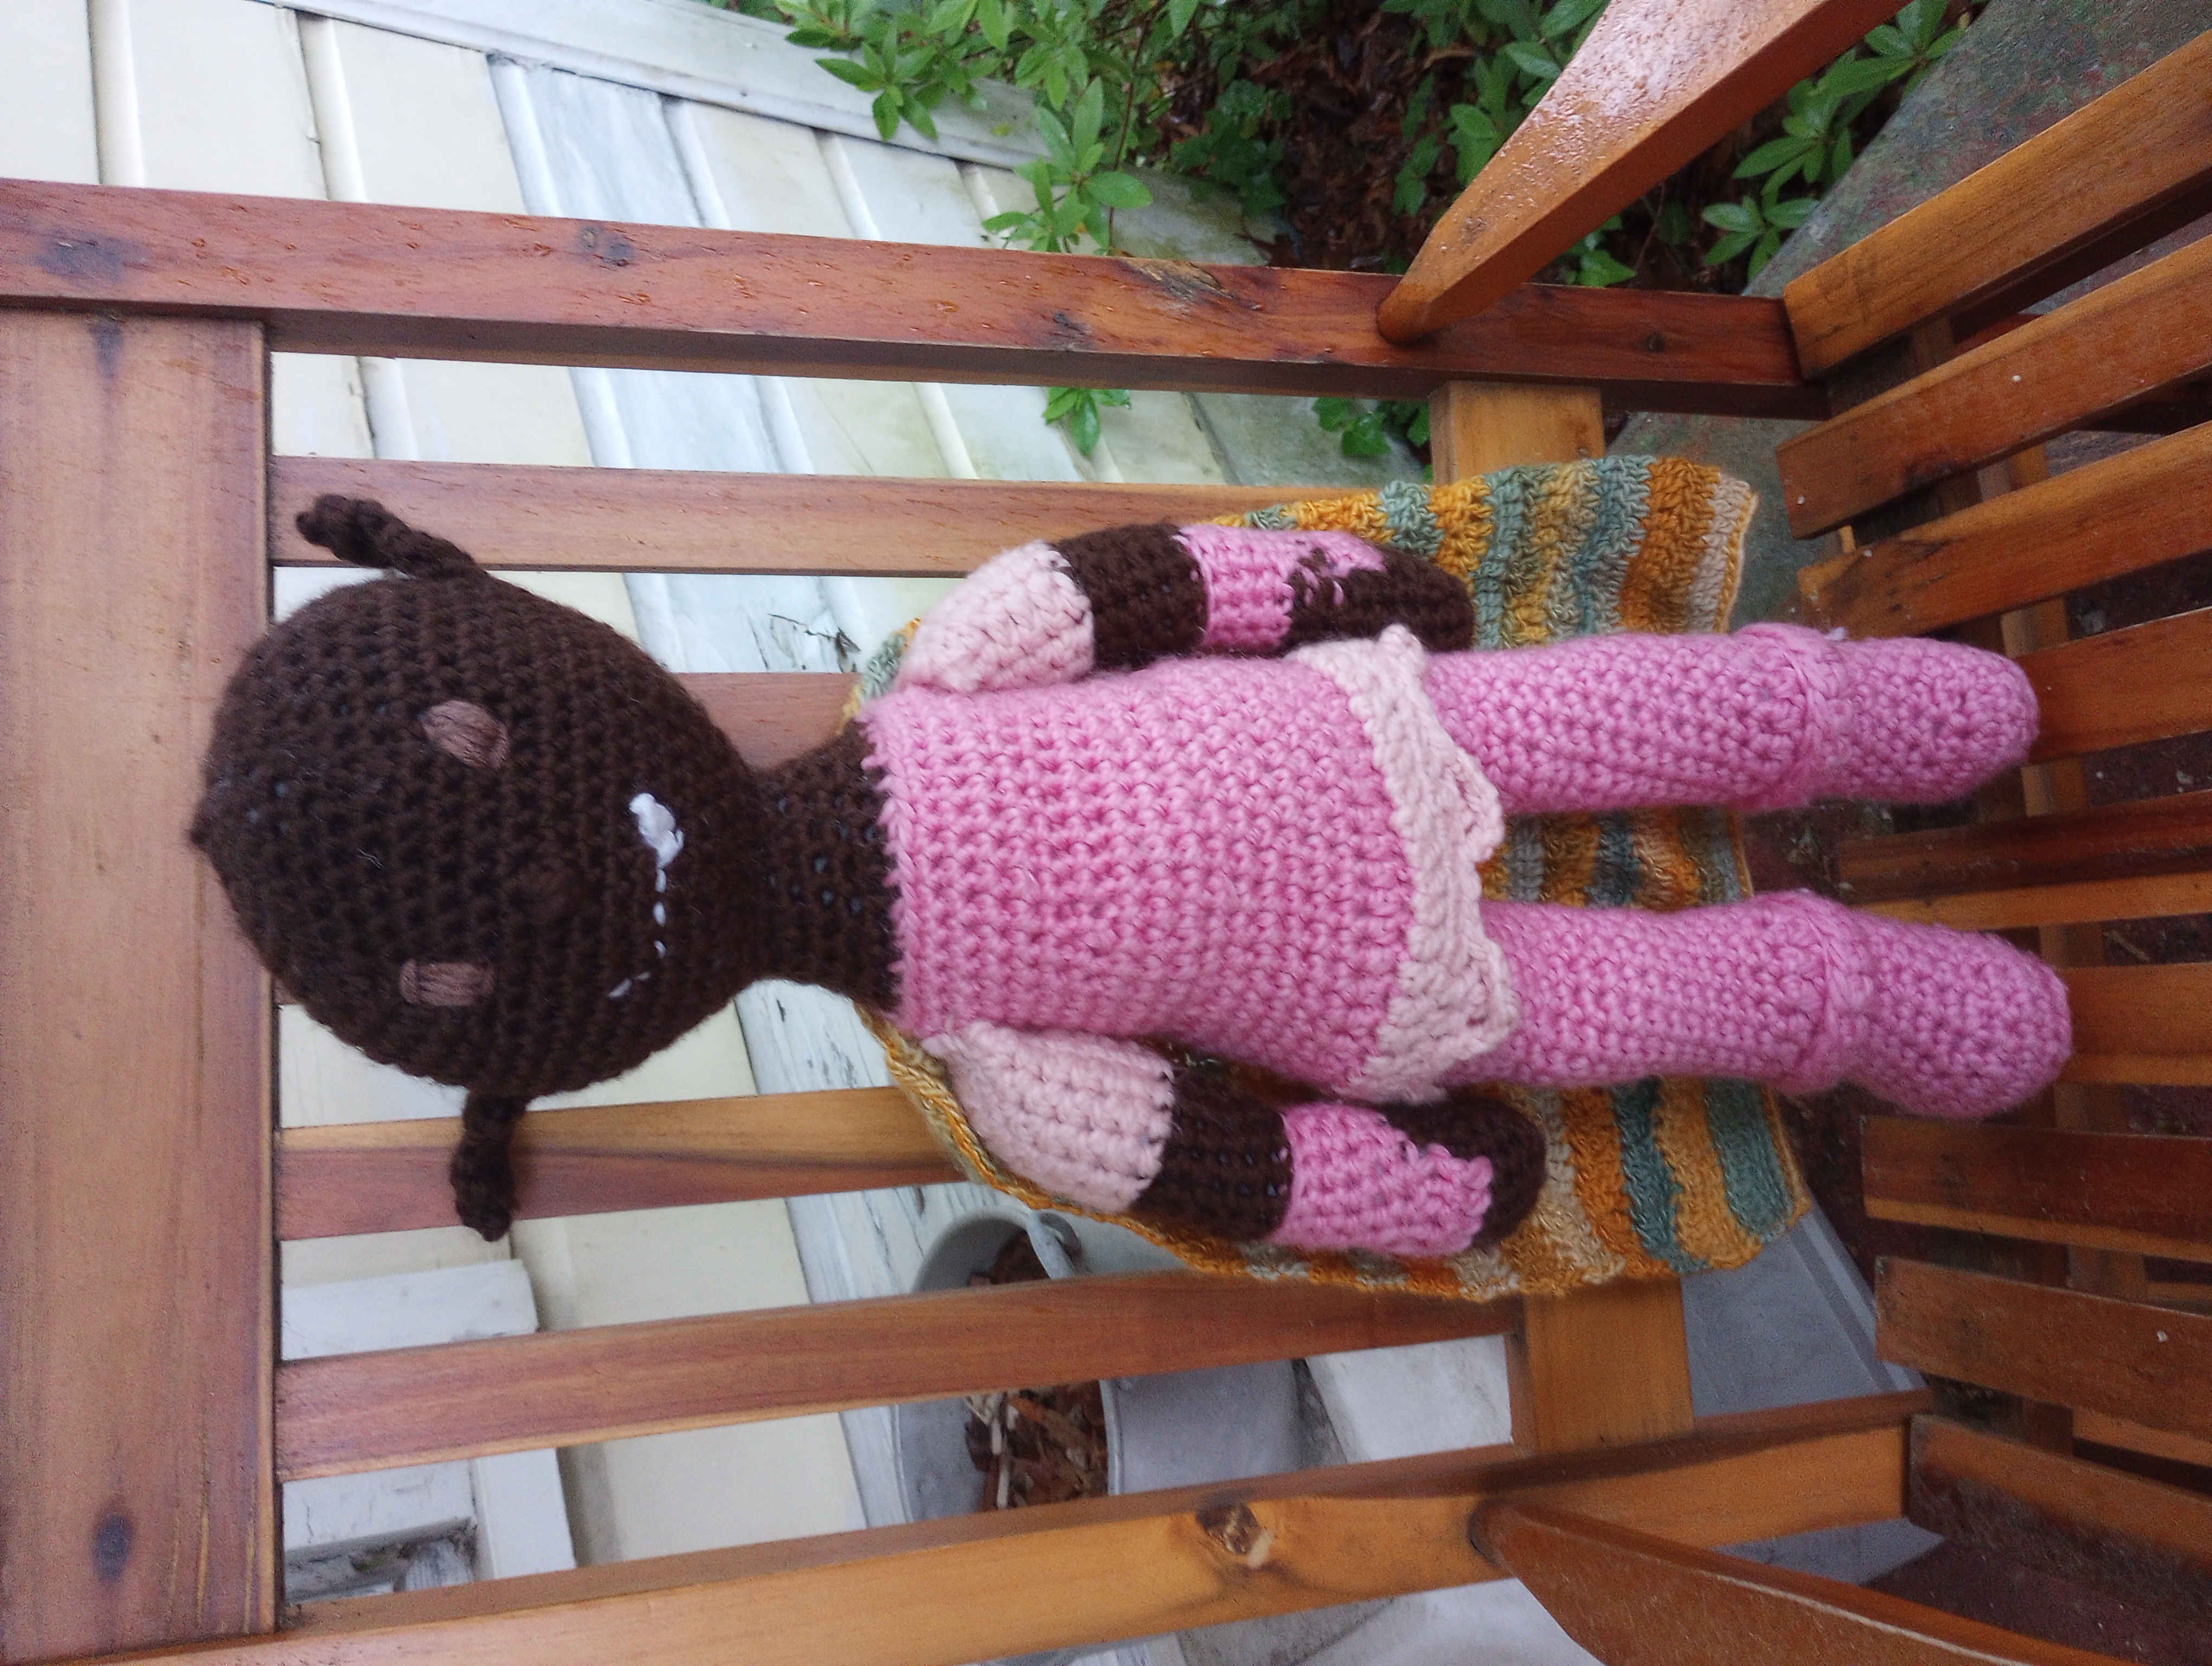 A crocheted doll with dark brown skin, pointed ears, a smile with a single pointed fang, light brown eyes, pink armor with lighter pink sleeves and trim around the waistline, and a gold-green multicolored cloak hanging down the back